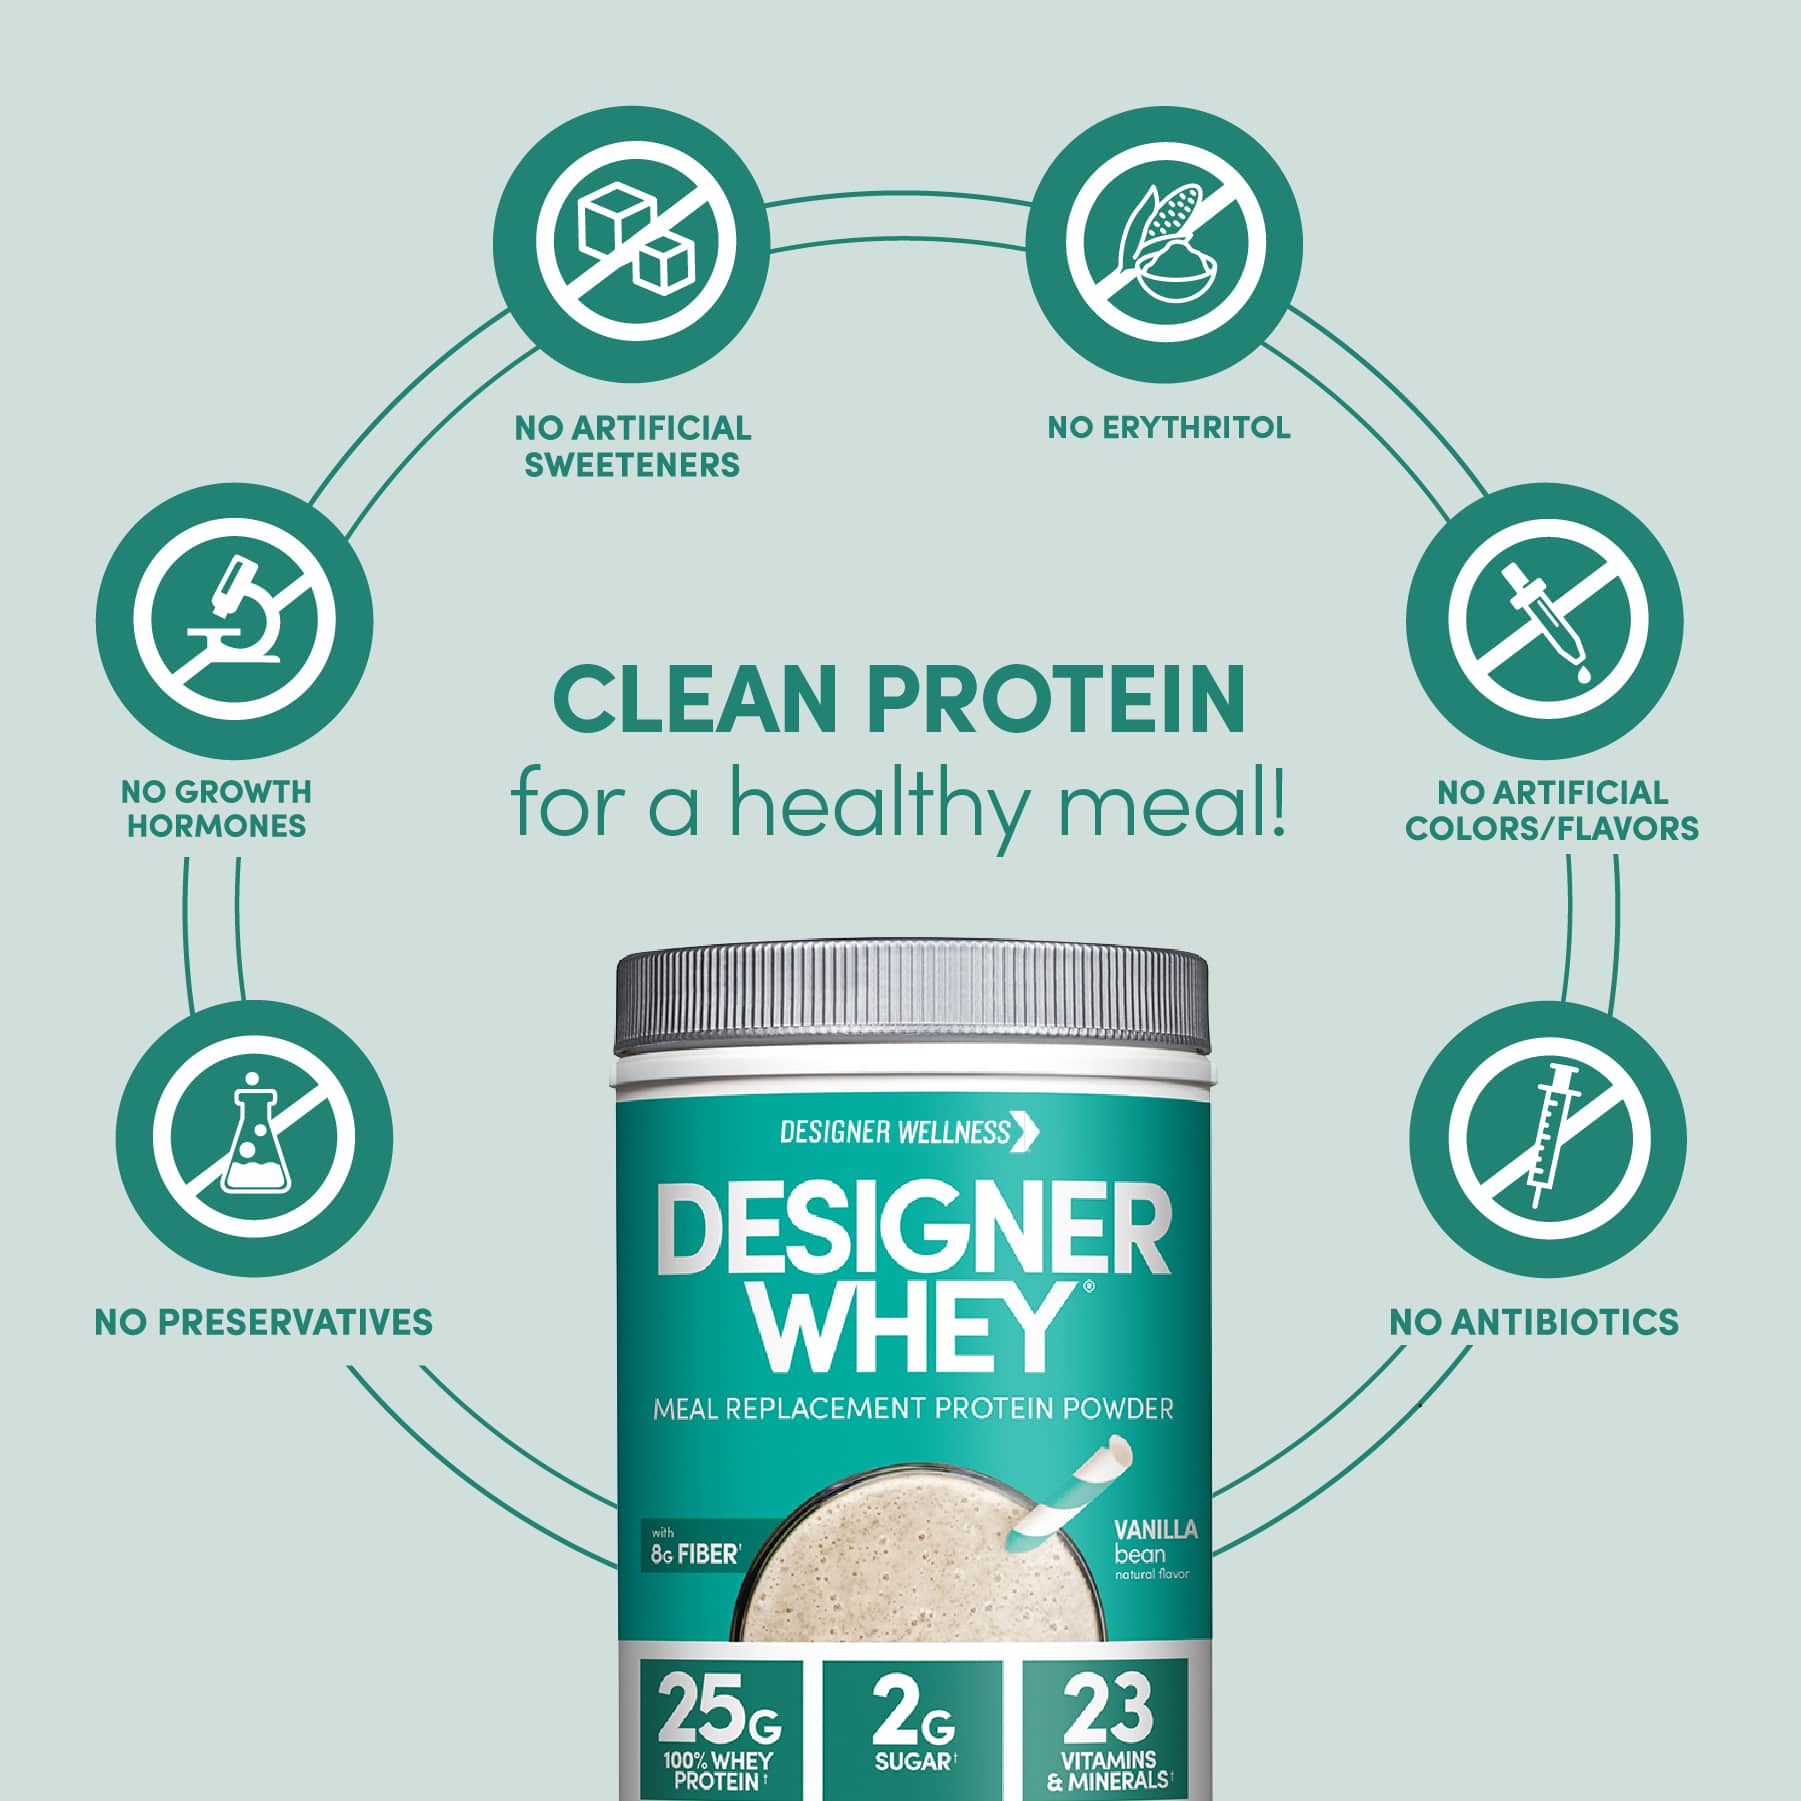 Copy of Designer Whey: Meal Replacement Protein Powder | Chocolate (8302896840930)